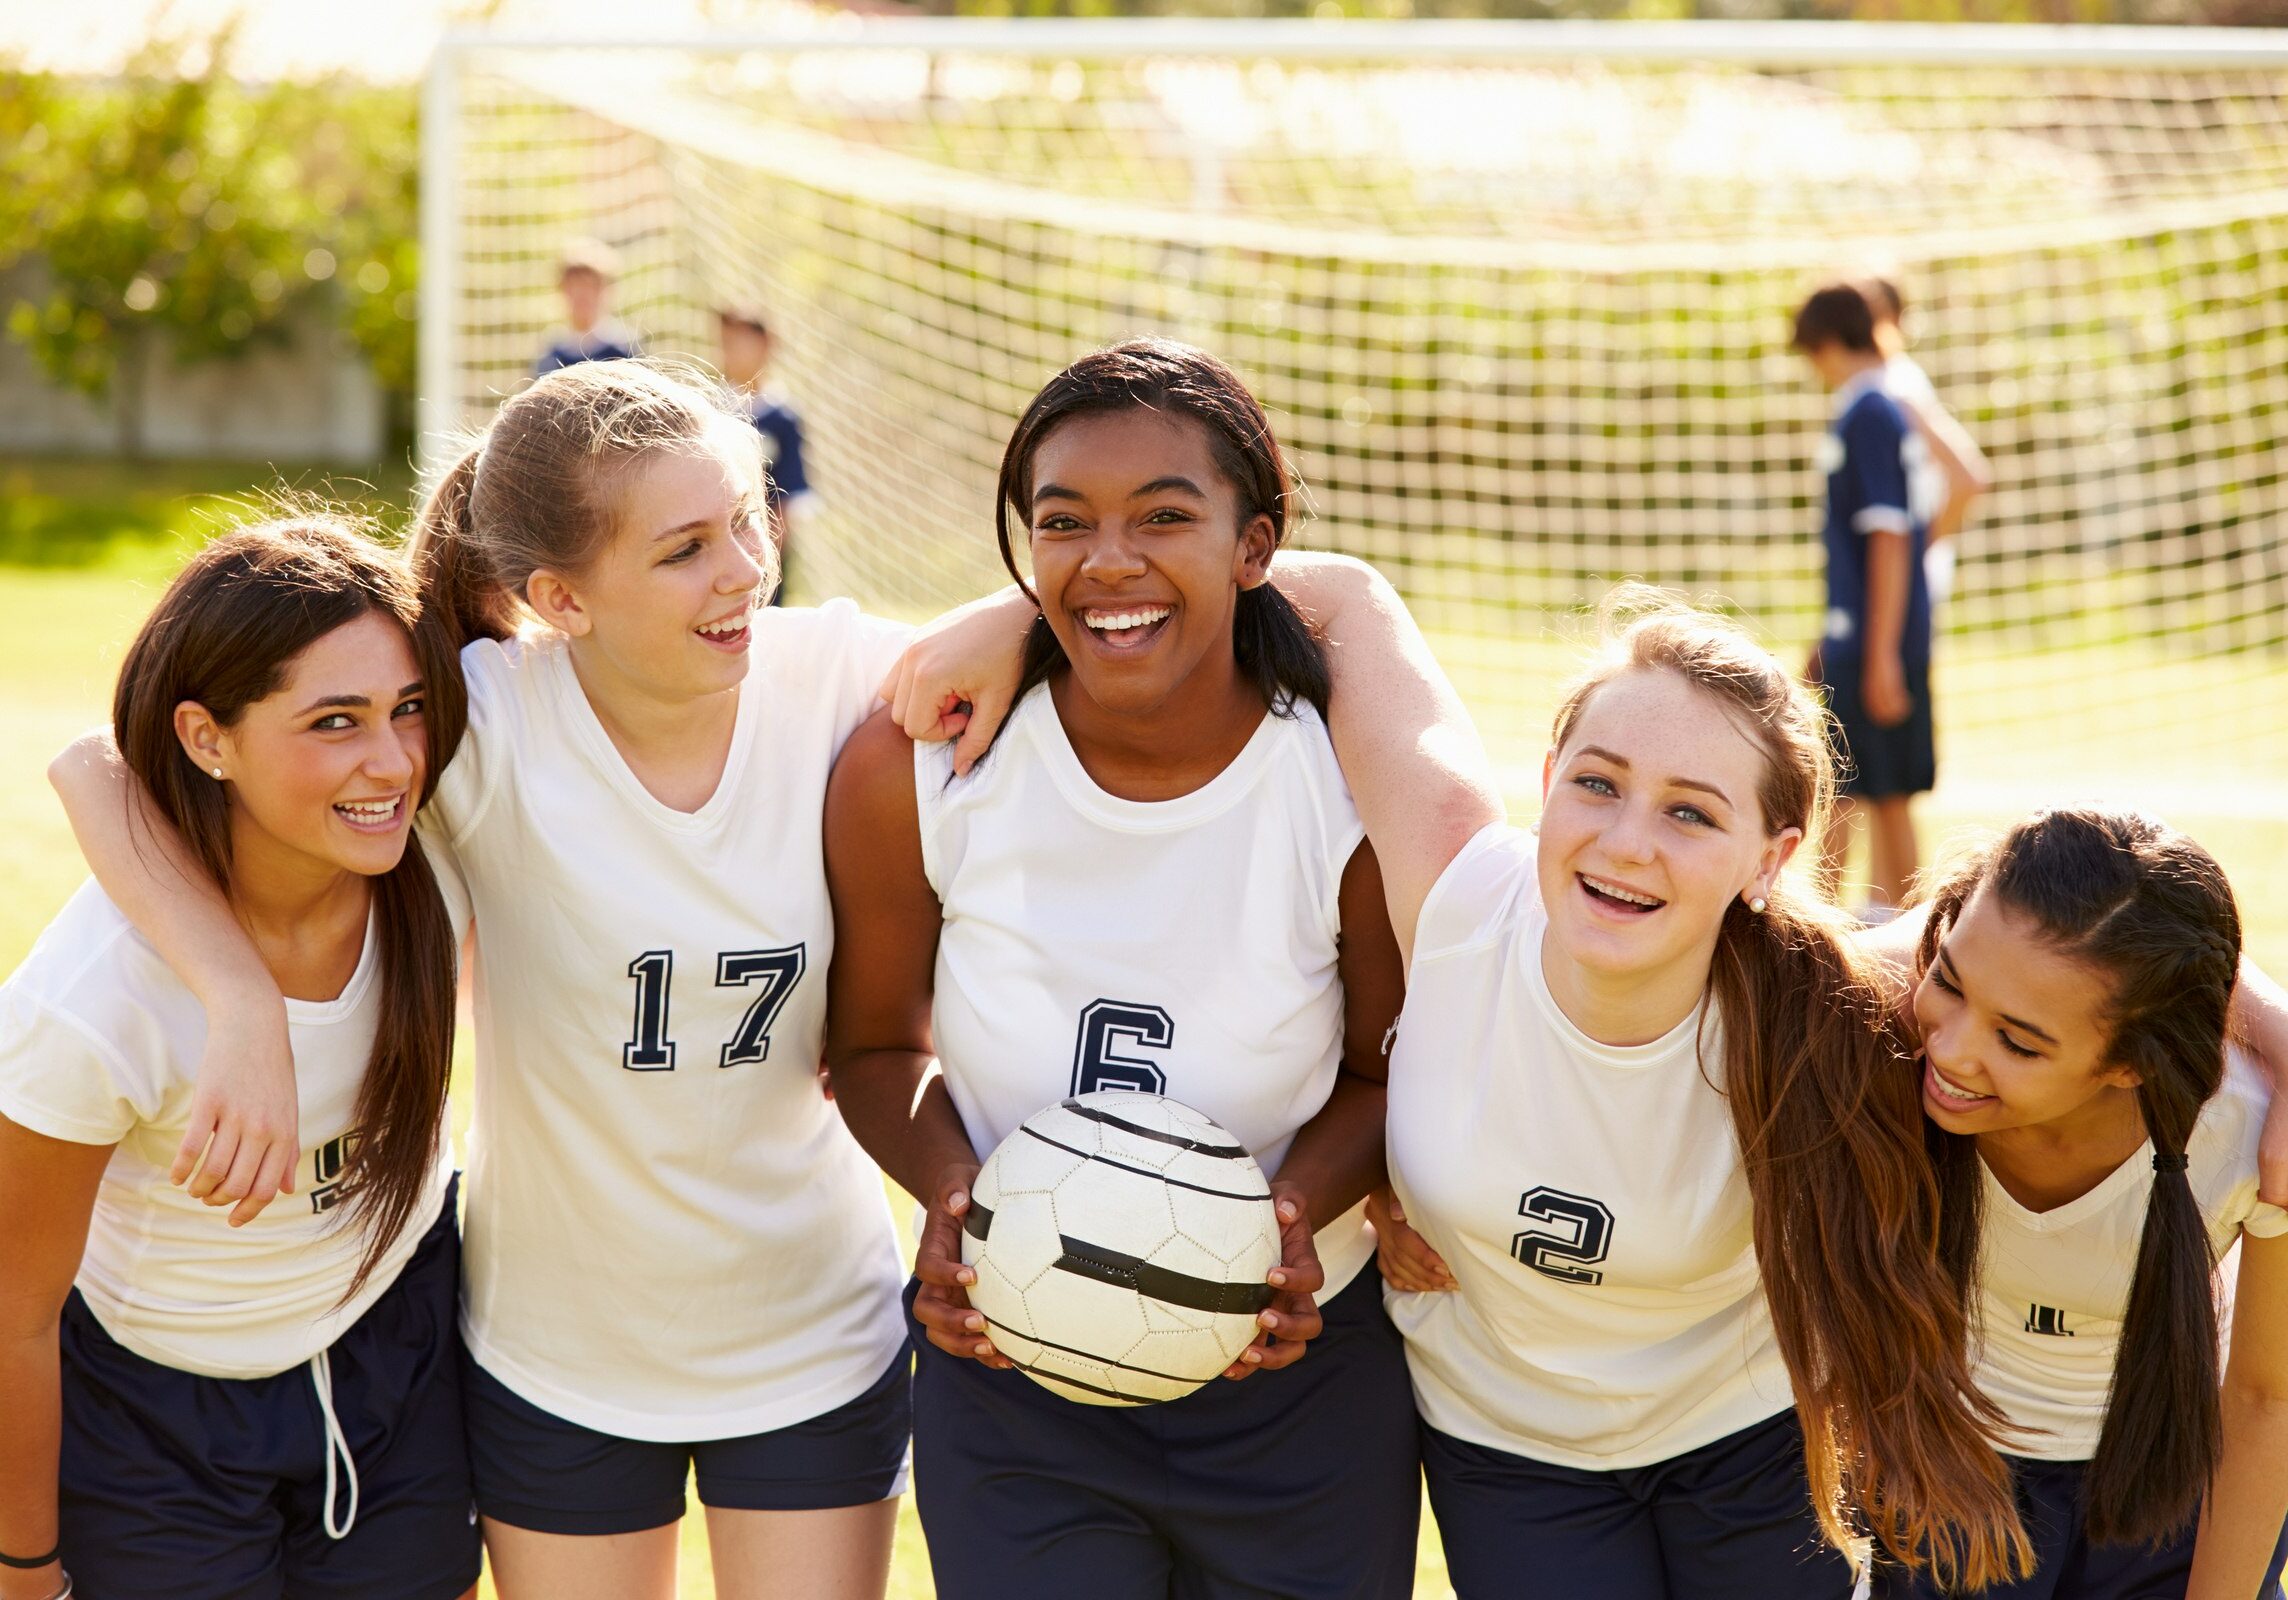 Members Of Female High School Soccer Team Smiling To Camera